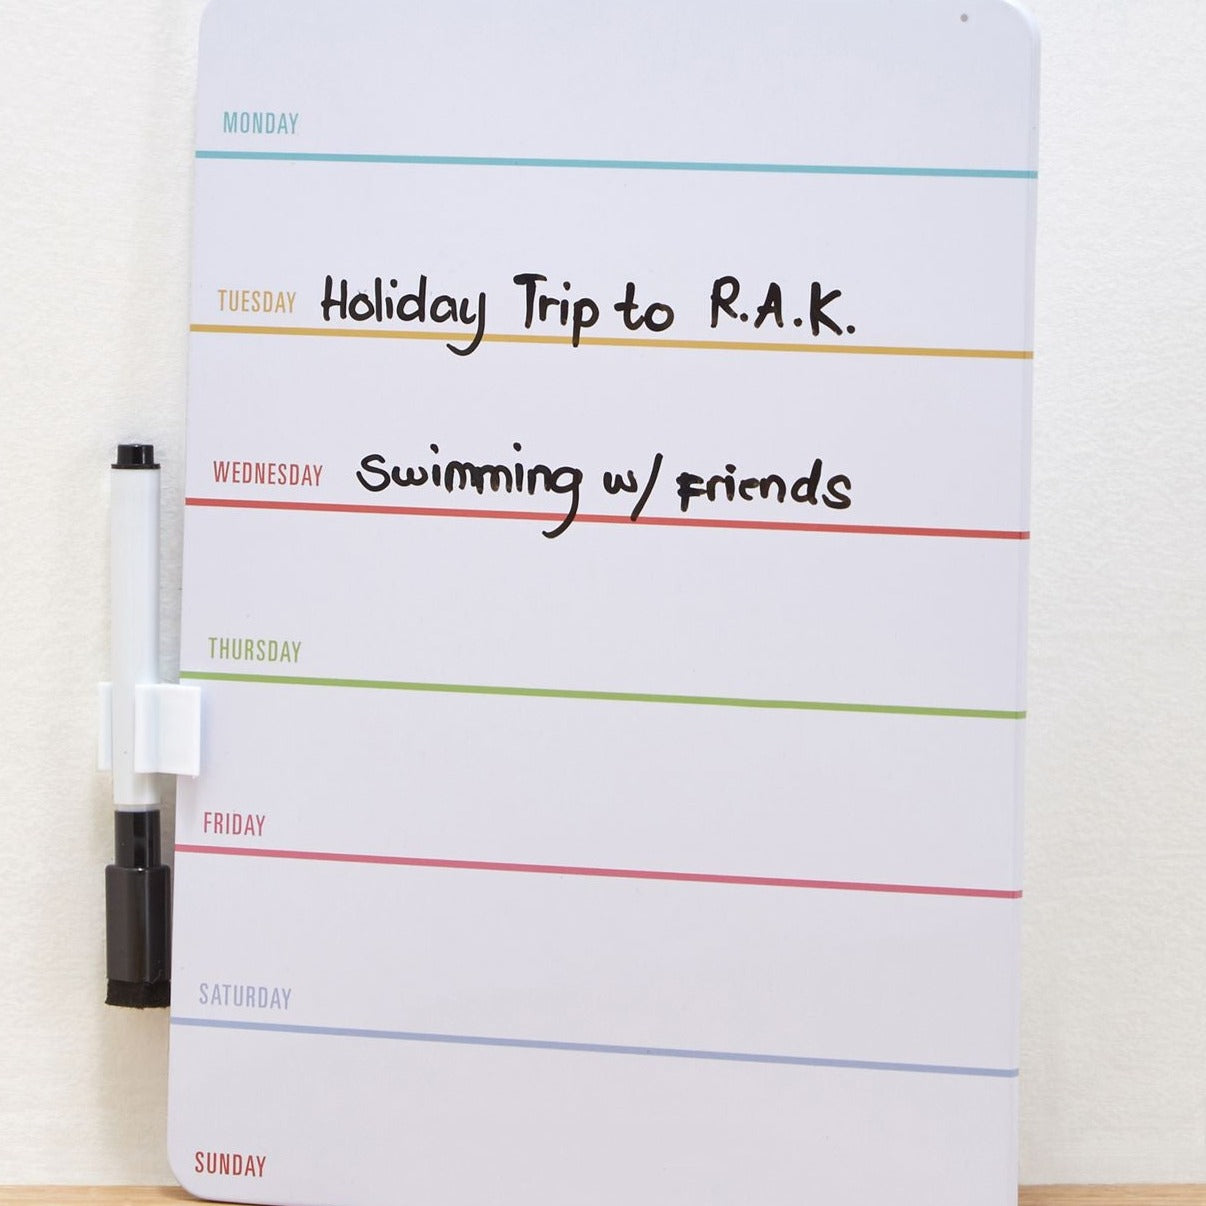 Fabulous Gifts | Kikkerland - Dry Erase Board Weekly by Weirs of Baggot Street